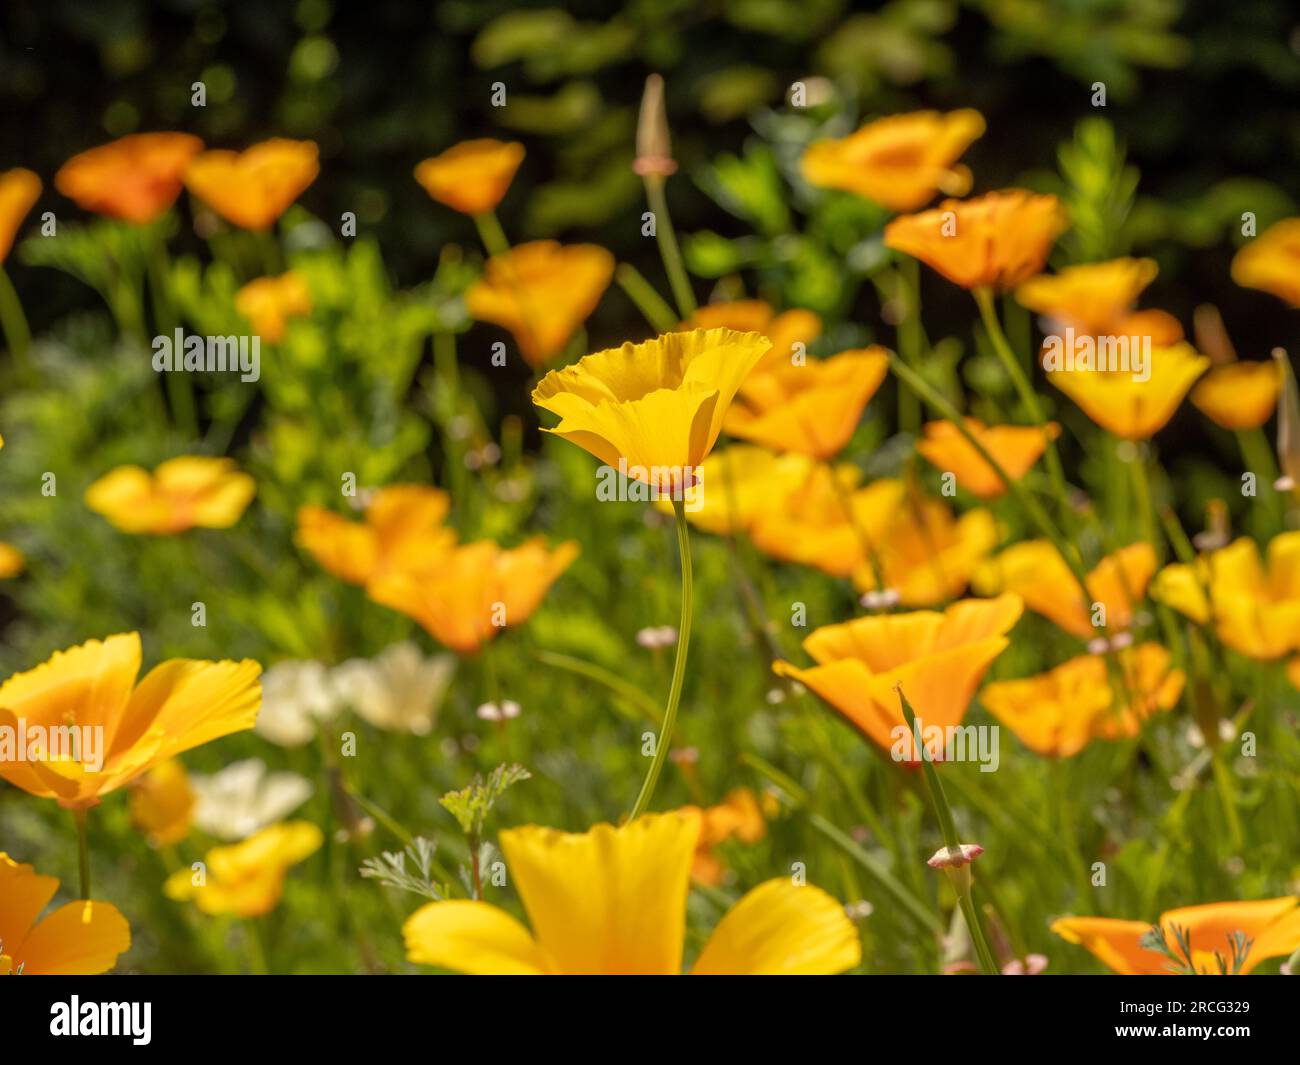 Yellow flowers of Californian poppies glowing in the sunlight of a UK garden. Stock Photo